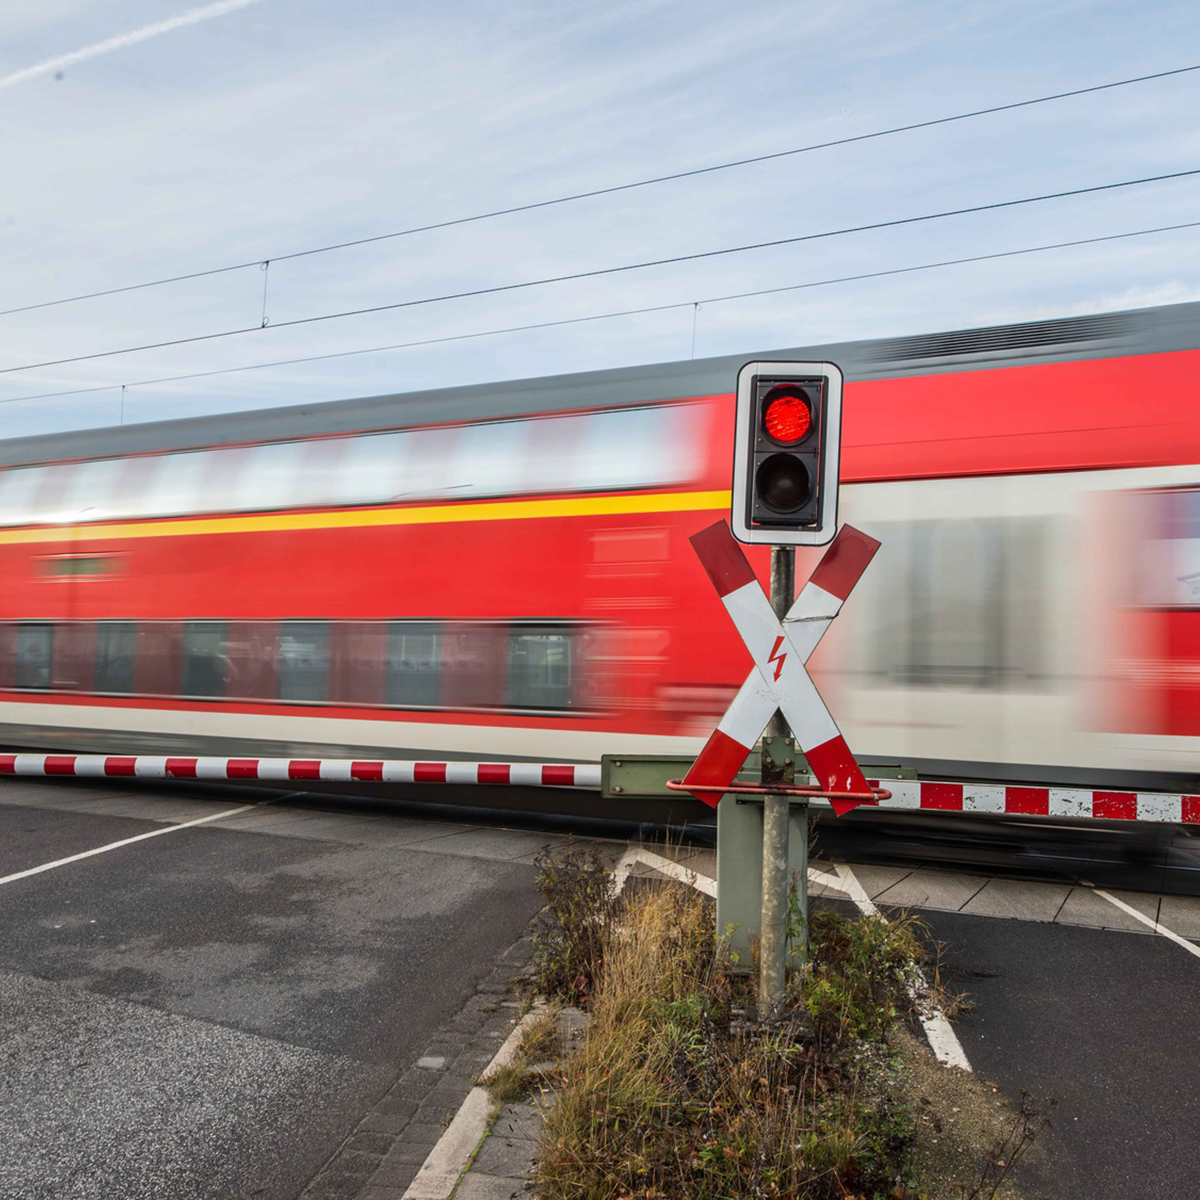 Saft partners with Colas Rail to modernize Serbia’s rail trackside infrastructure